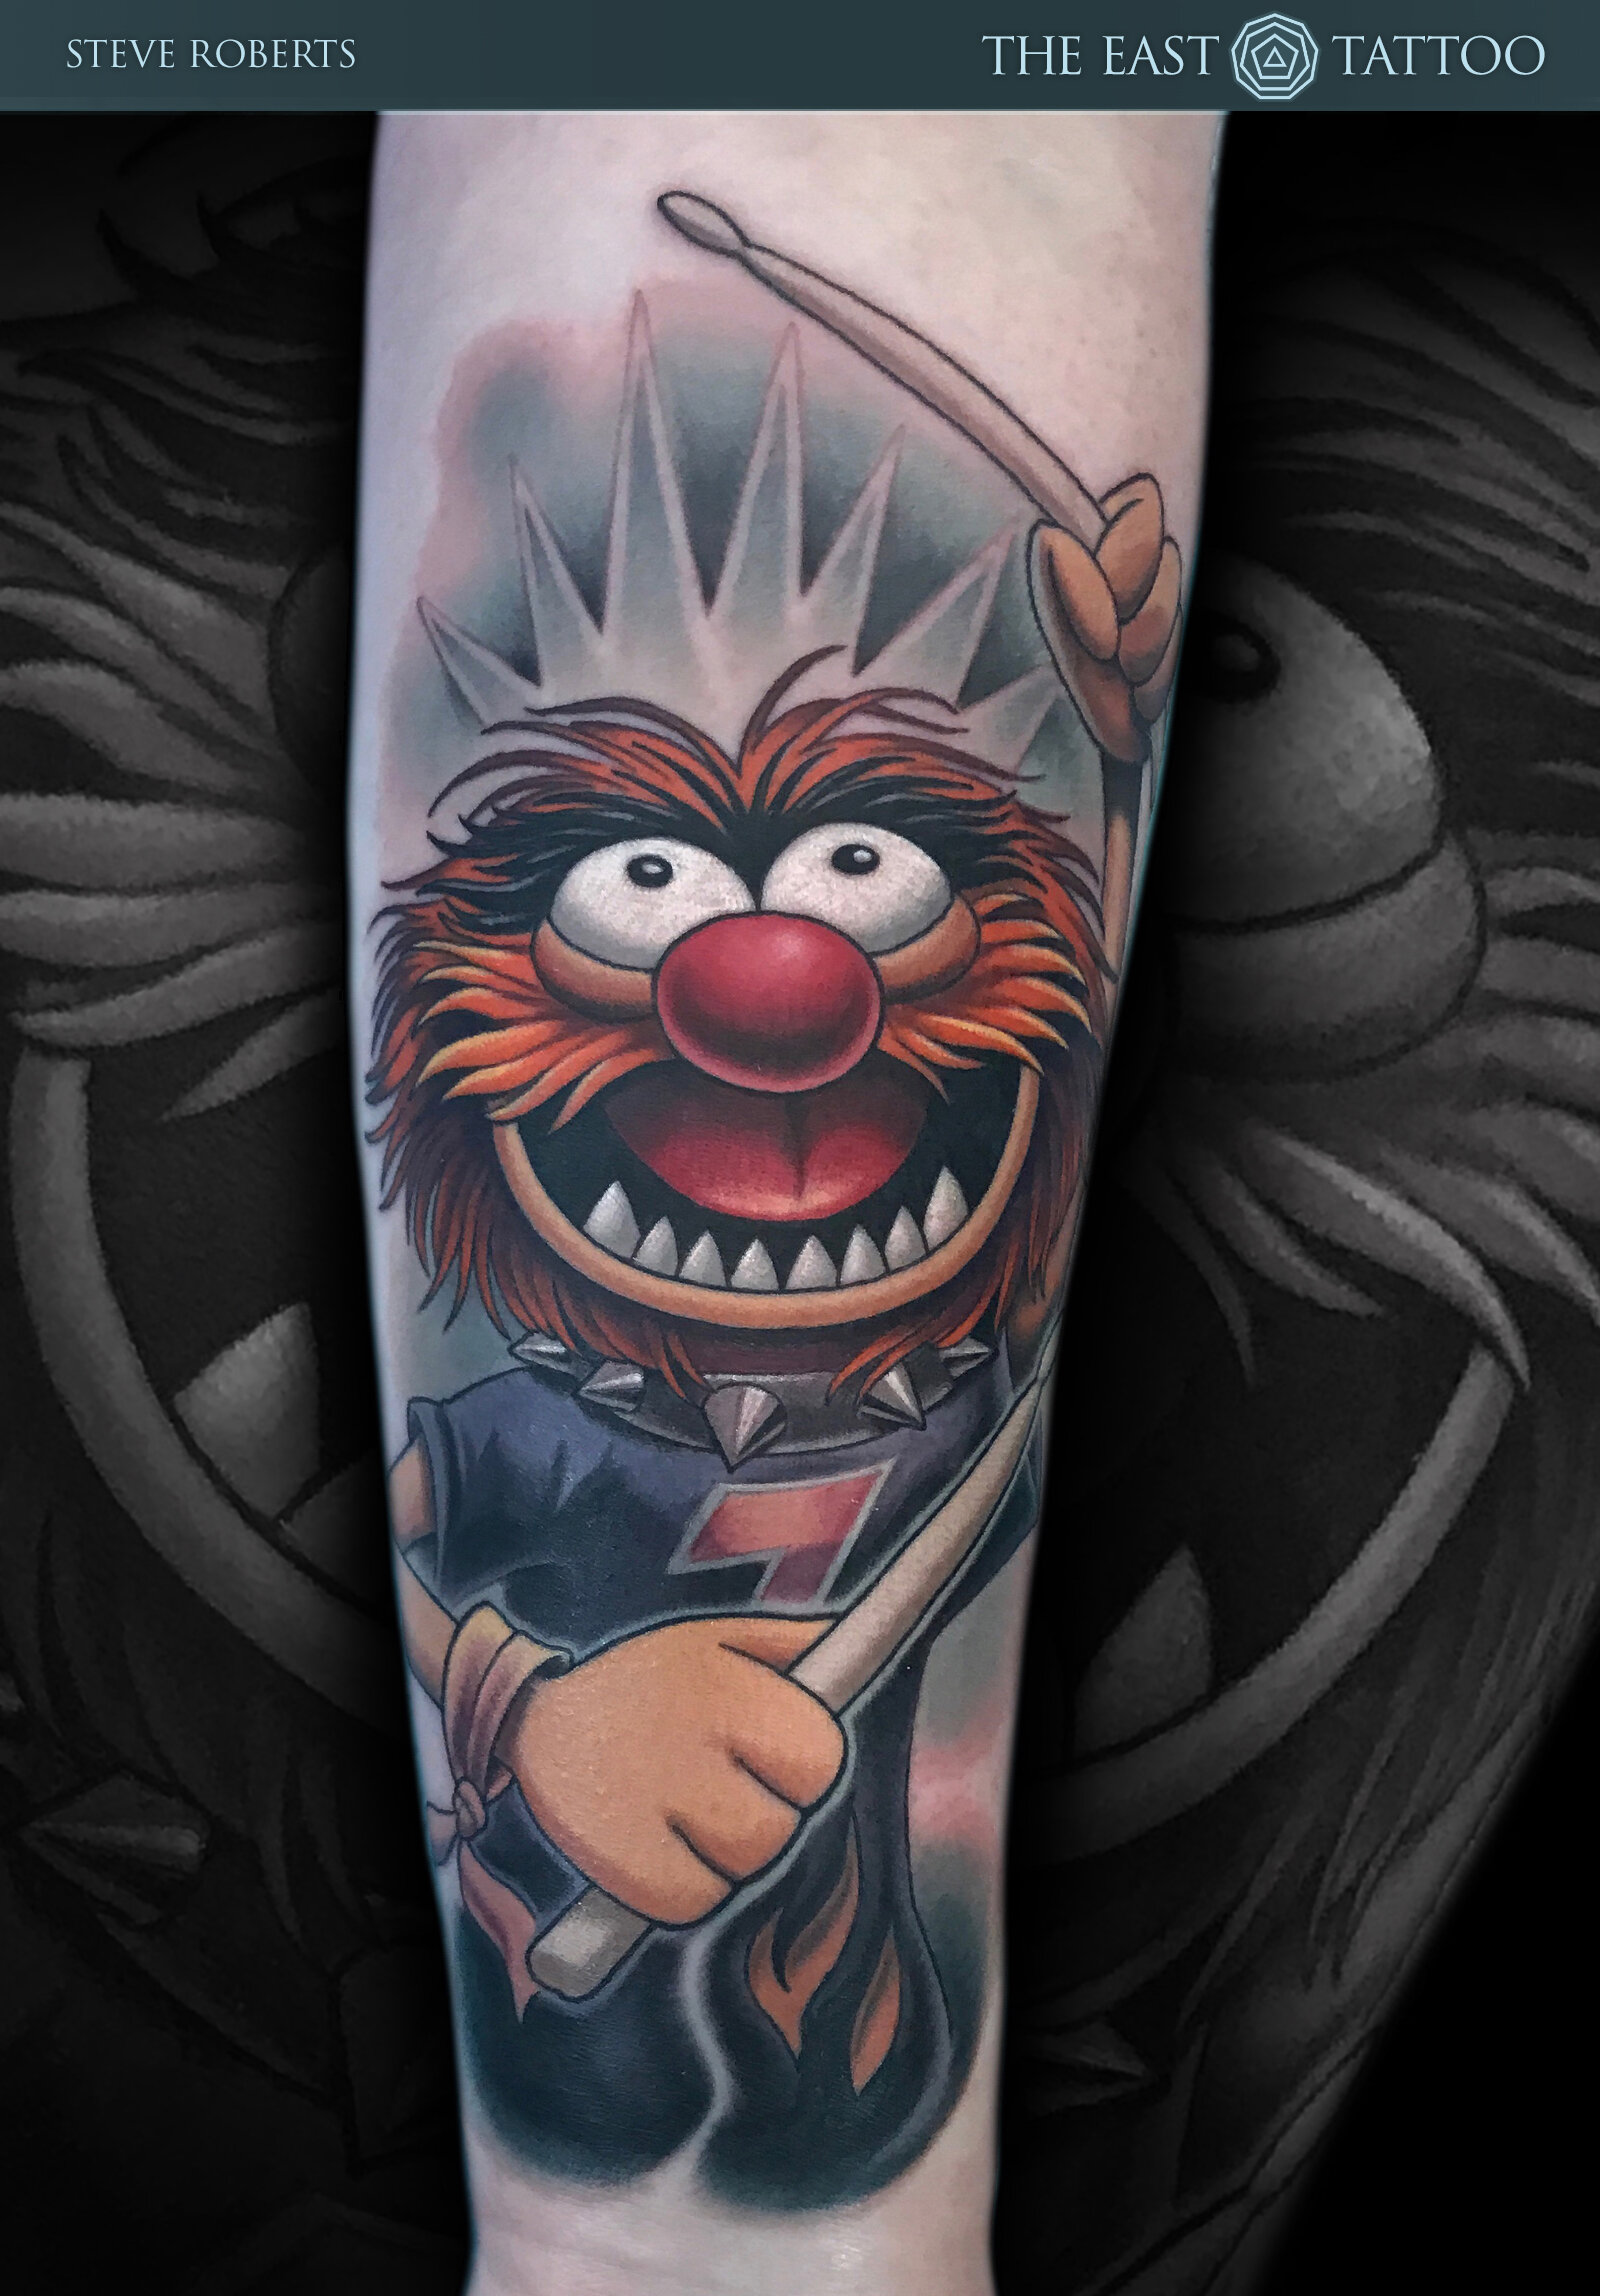 Ugliest Tattoos  muppets  Bad tattoos of horrible fail situations that  are permanent and on your body  funny tattoos  bad tattoos  horrible  tattoos  tattoo fail  Cheezburger